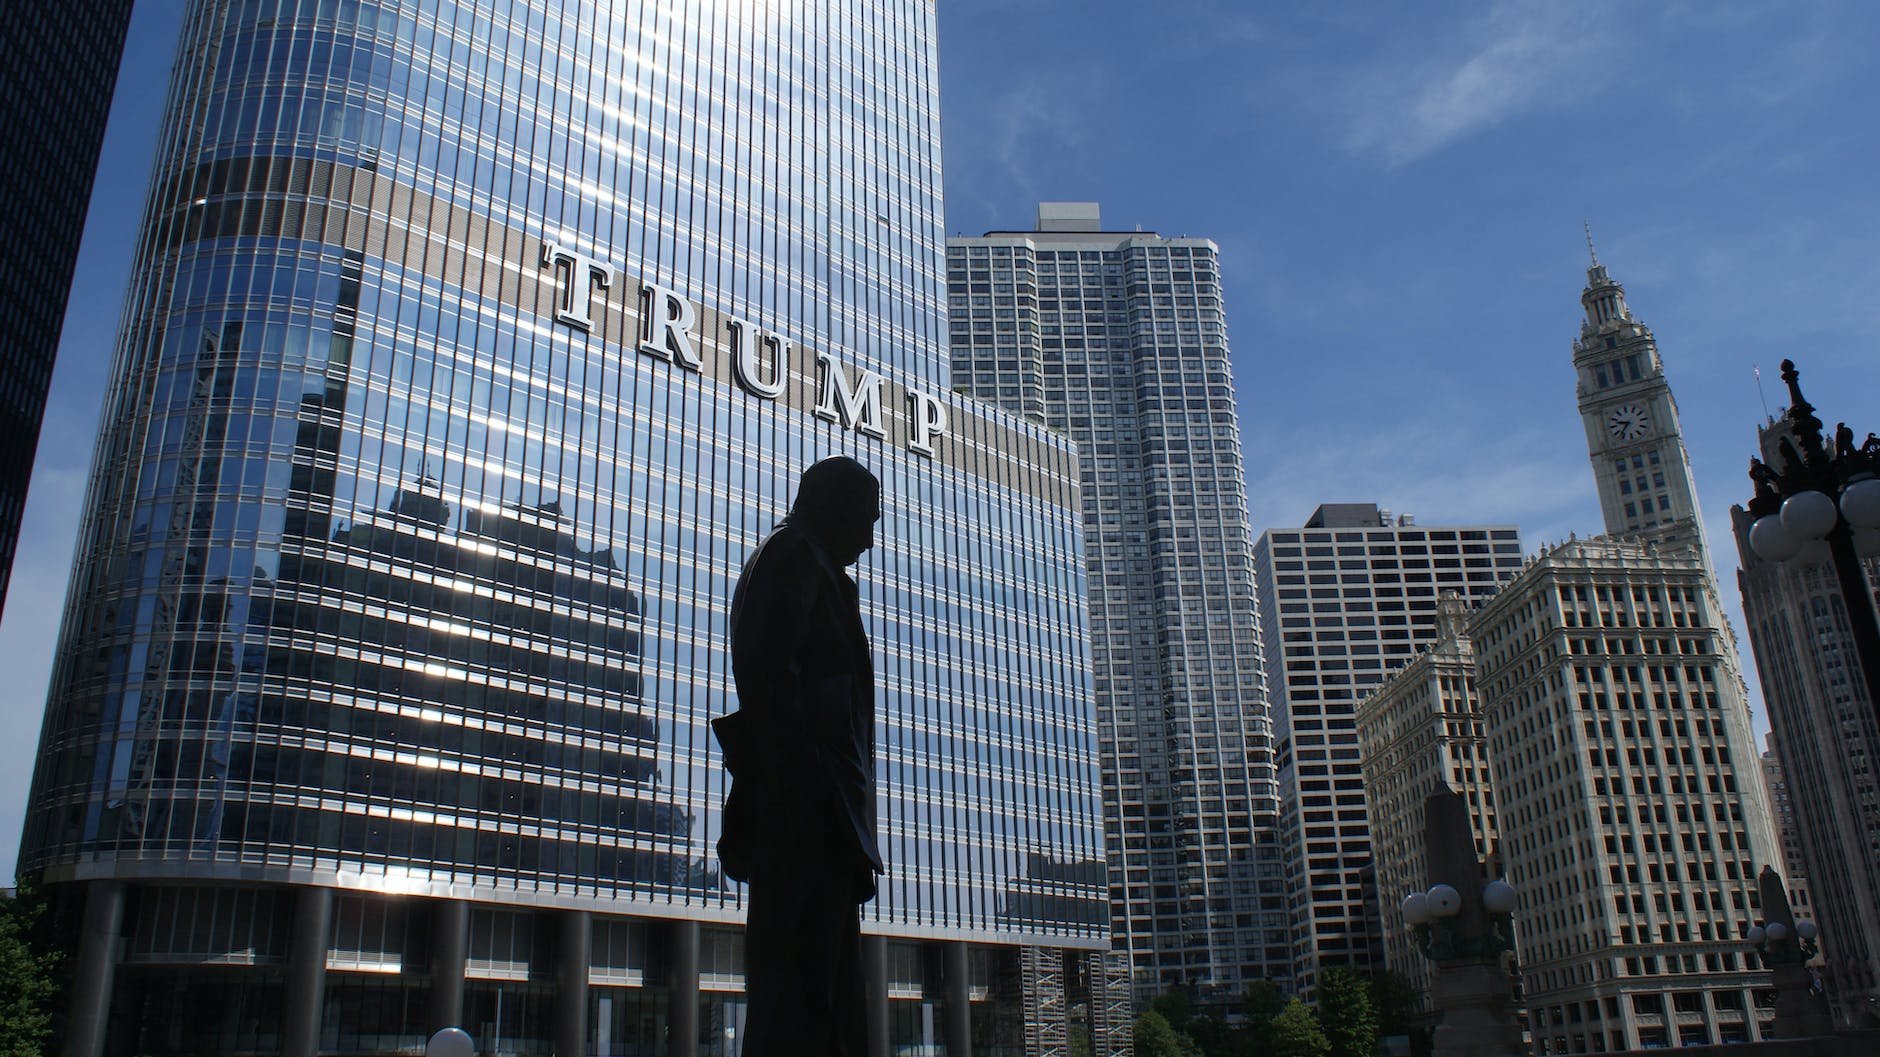 Tunnel vision on the presidential aspect - silhouette of statue near trump building at daytime